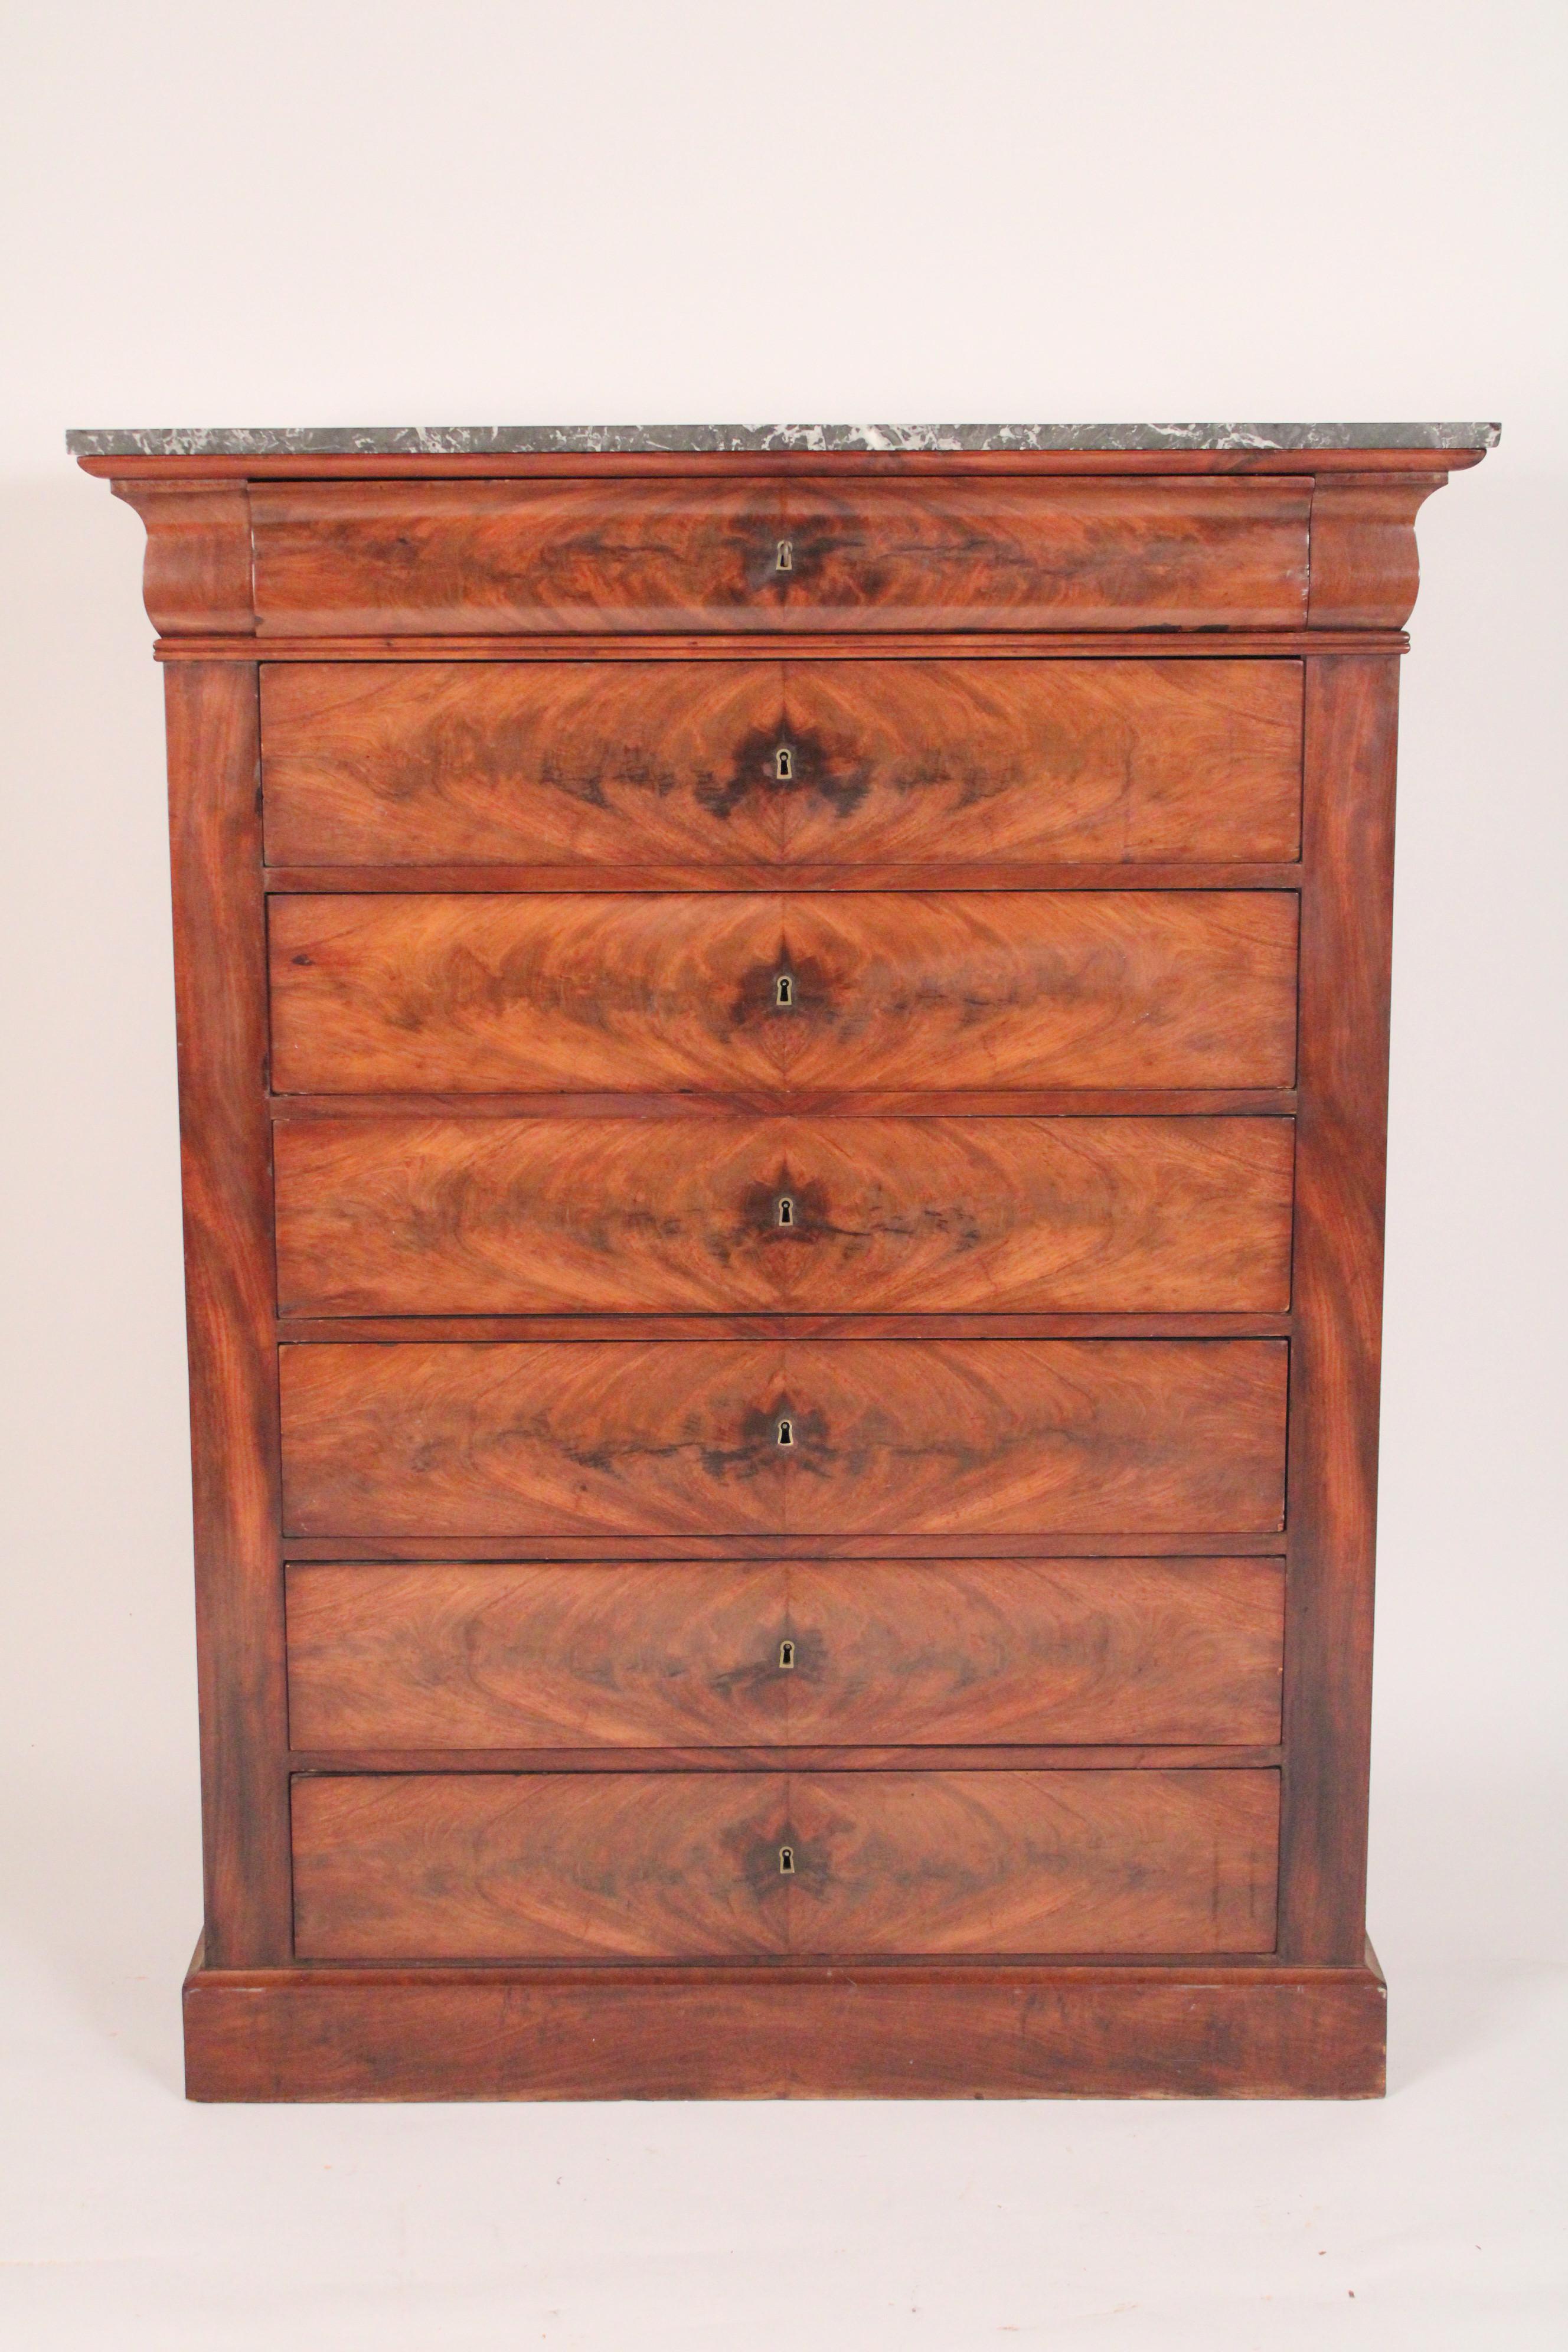 Antique Napoleon III flame mahogany semanier with marble top, late 19th century. With original grey and white marble top, nice quality flame mahogany on front of semanier and hand dove tailed drawer construction. Clean straight lines to go with